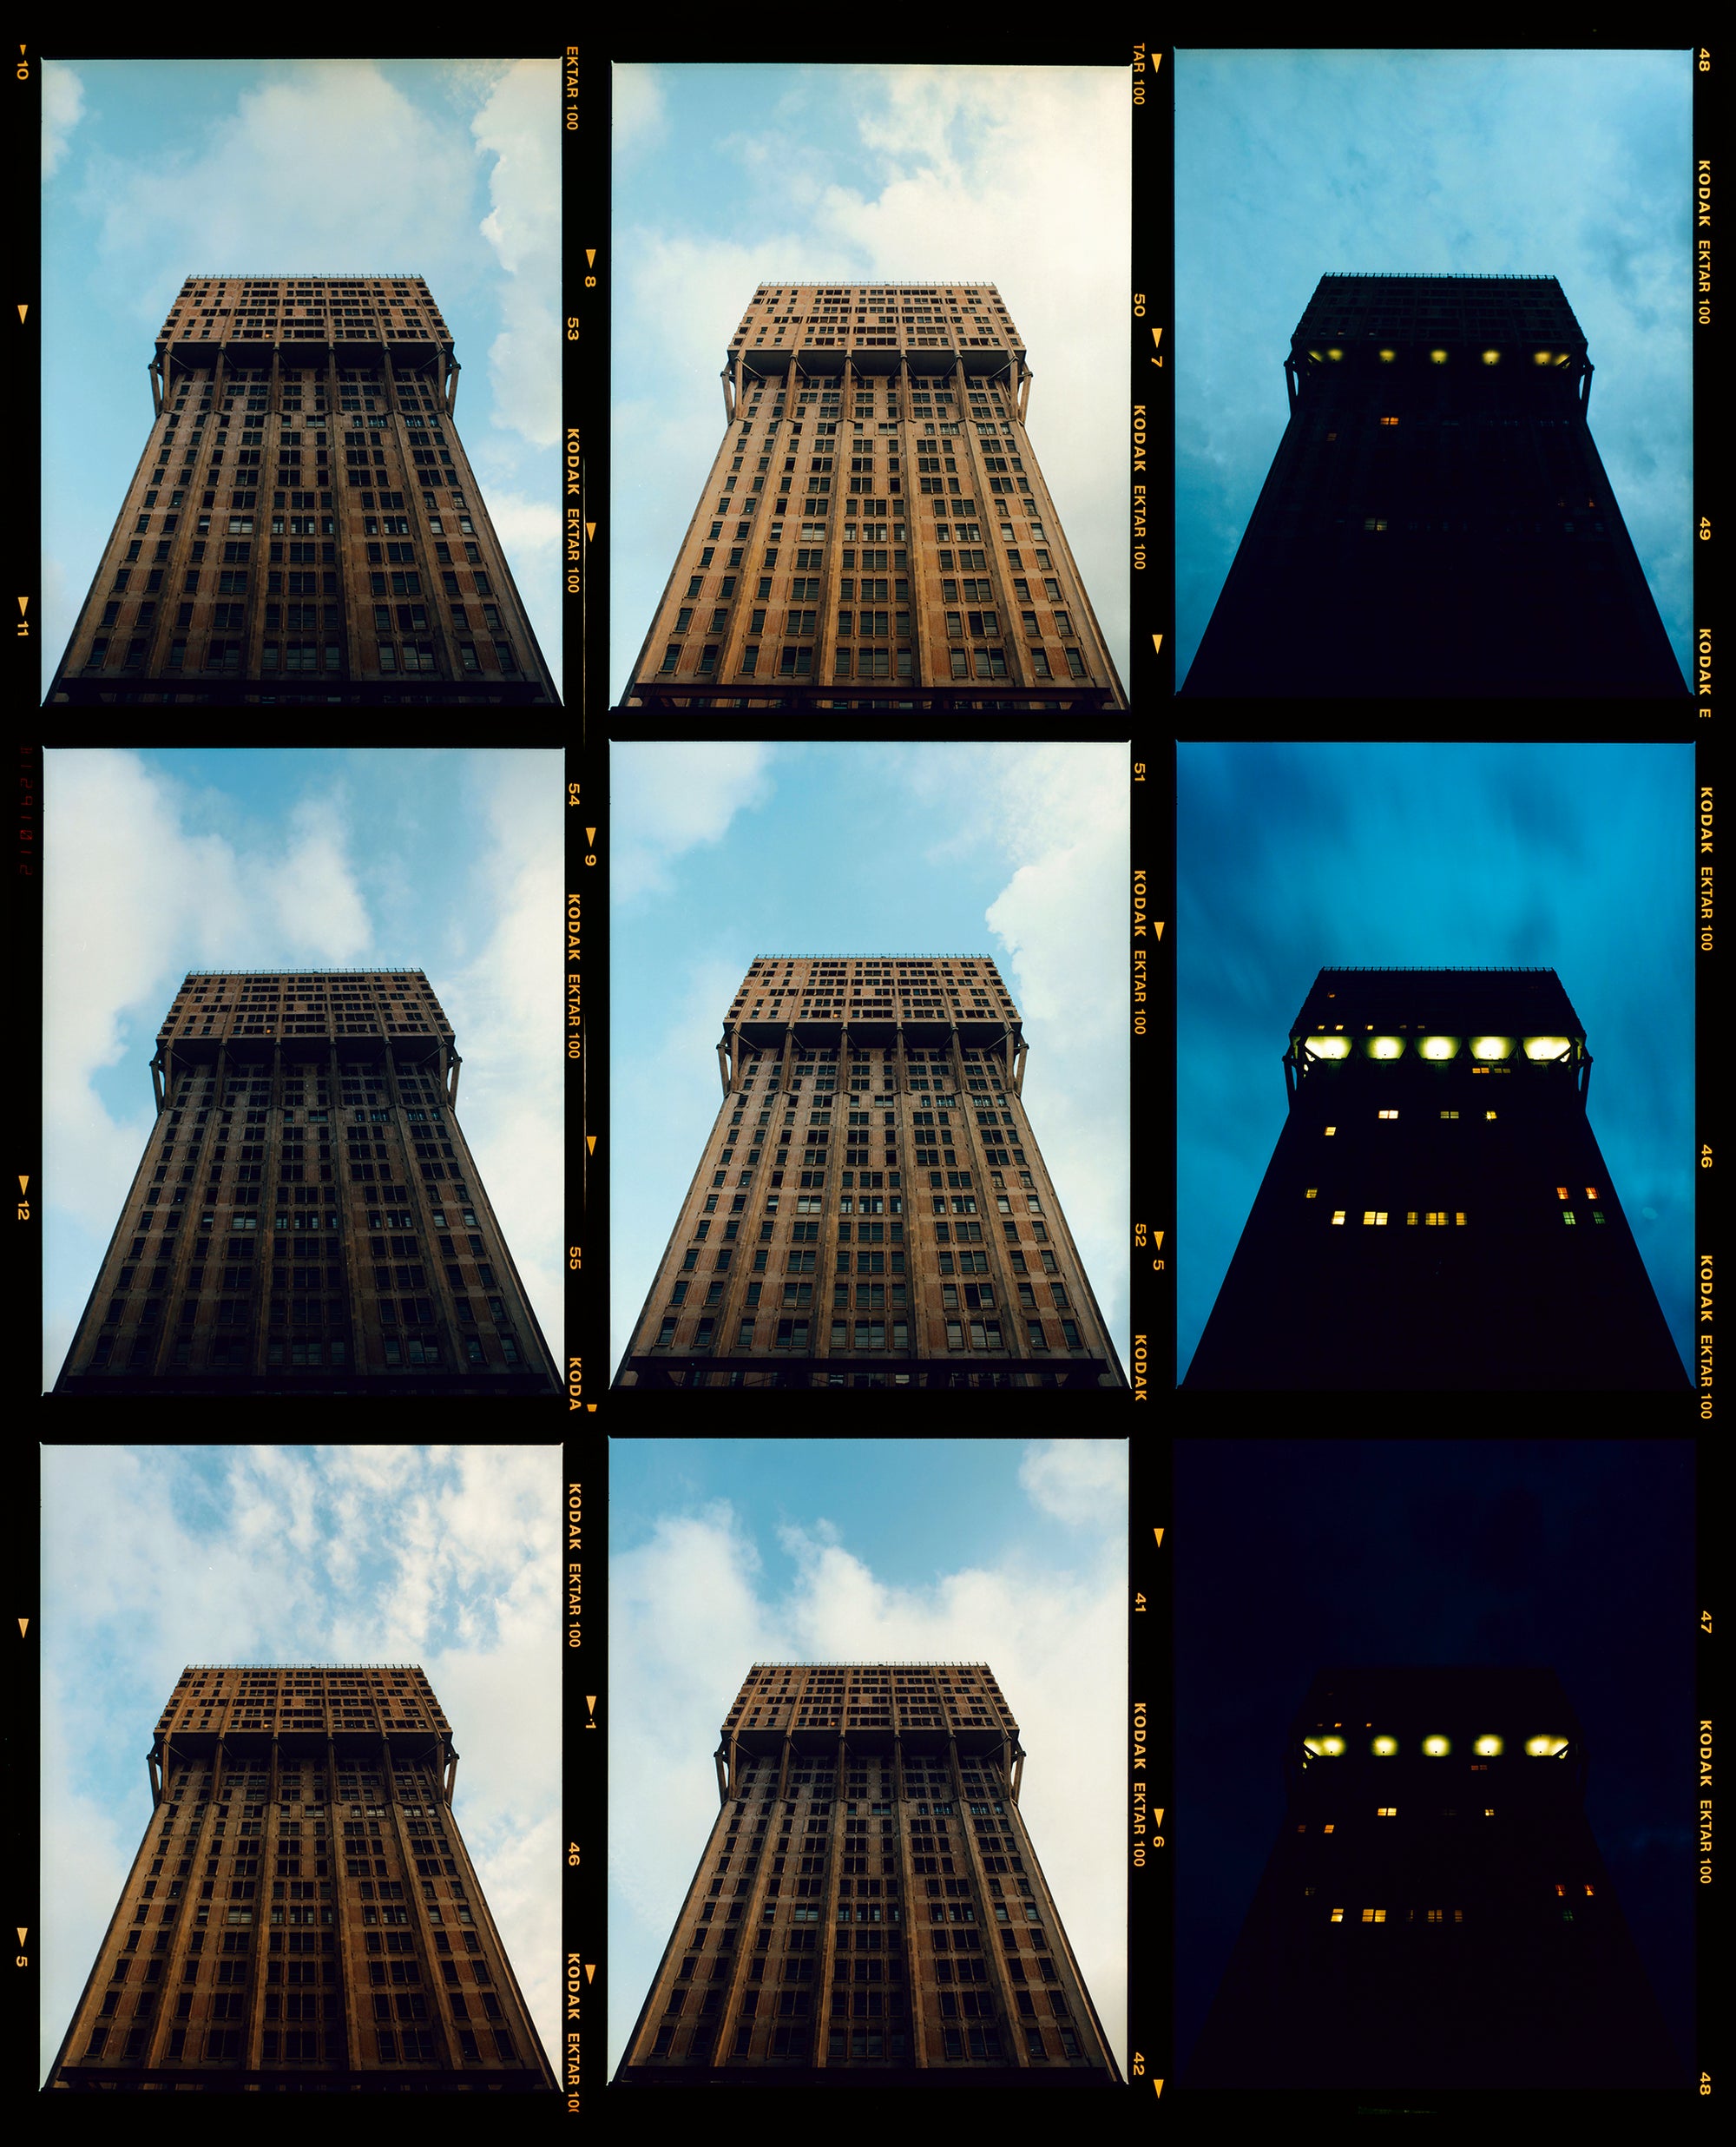 Photograph by Richard Heeps. The 1950s skyscraper, the Torre Valesca, is photographed throughout the day. Captured in the same position 9 times during the day, moving from top left, morning, to bottom right, night.